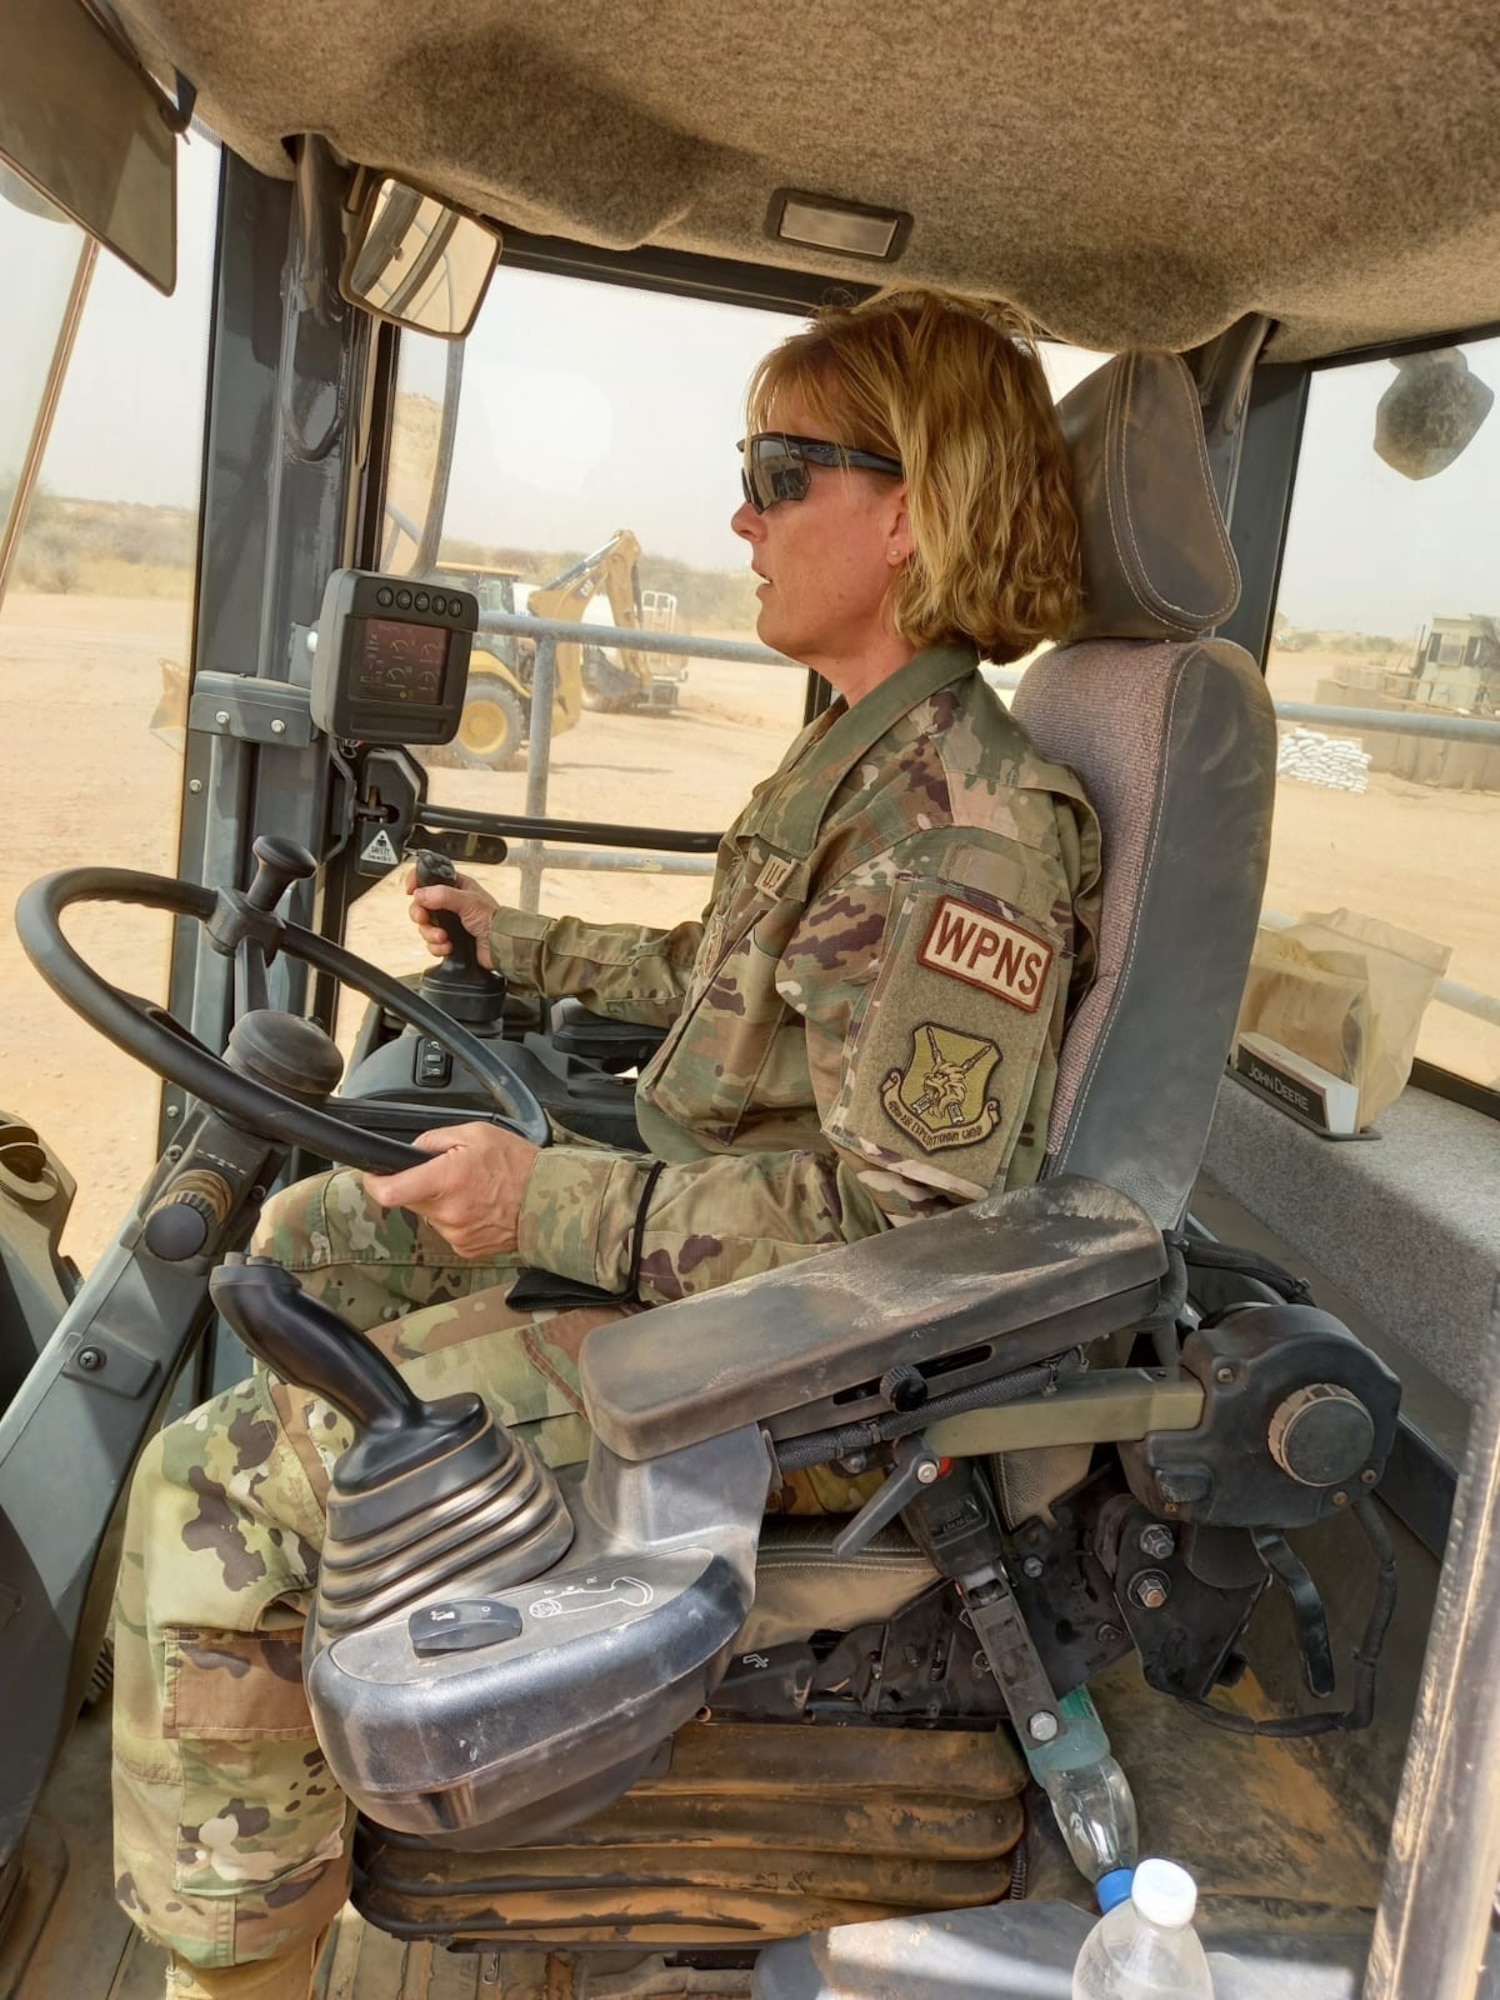 U.S. Air Force Master Sgt. Andrea Senecal, 158th Force Support Flight services superintendent, Vermont Air National Guard, operates heavy machinery while deployed to Airbase 201, Niger.